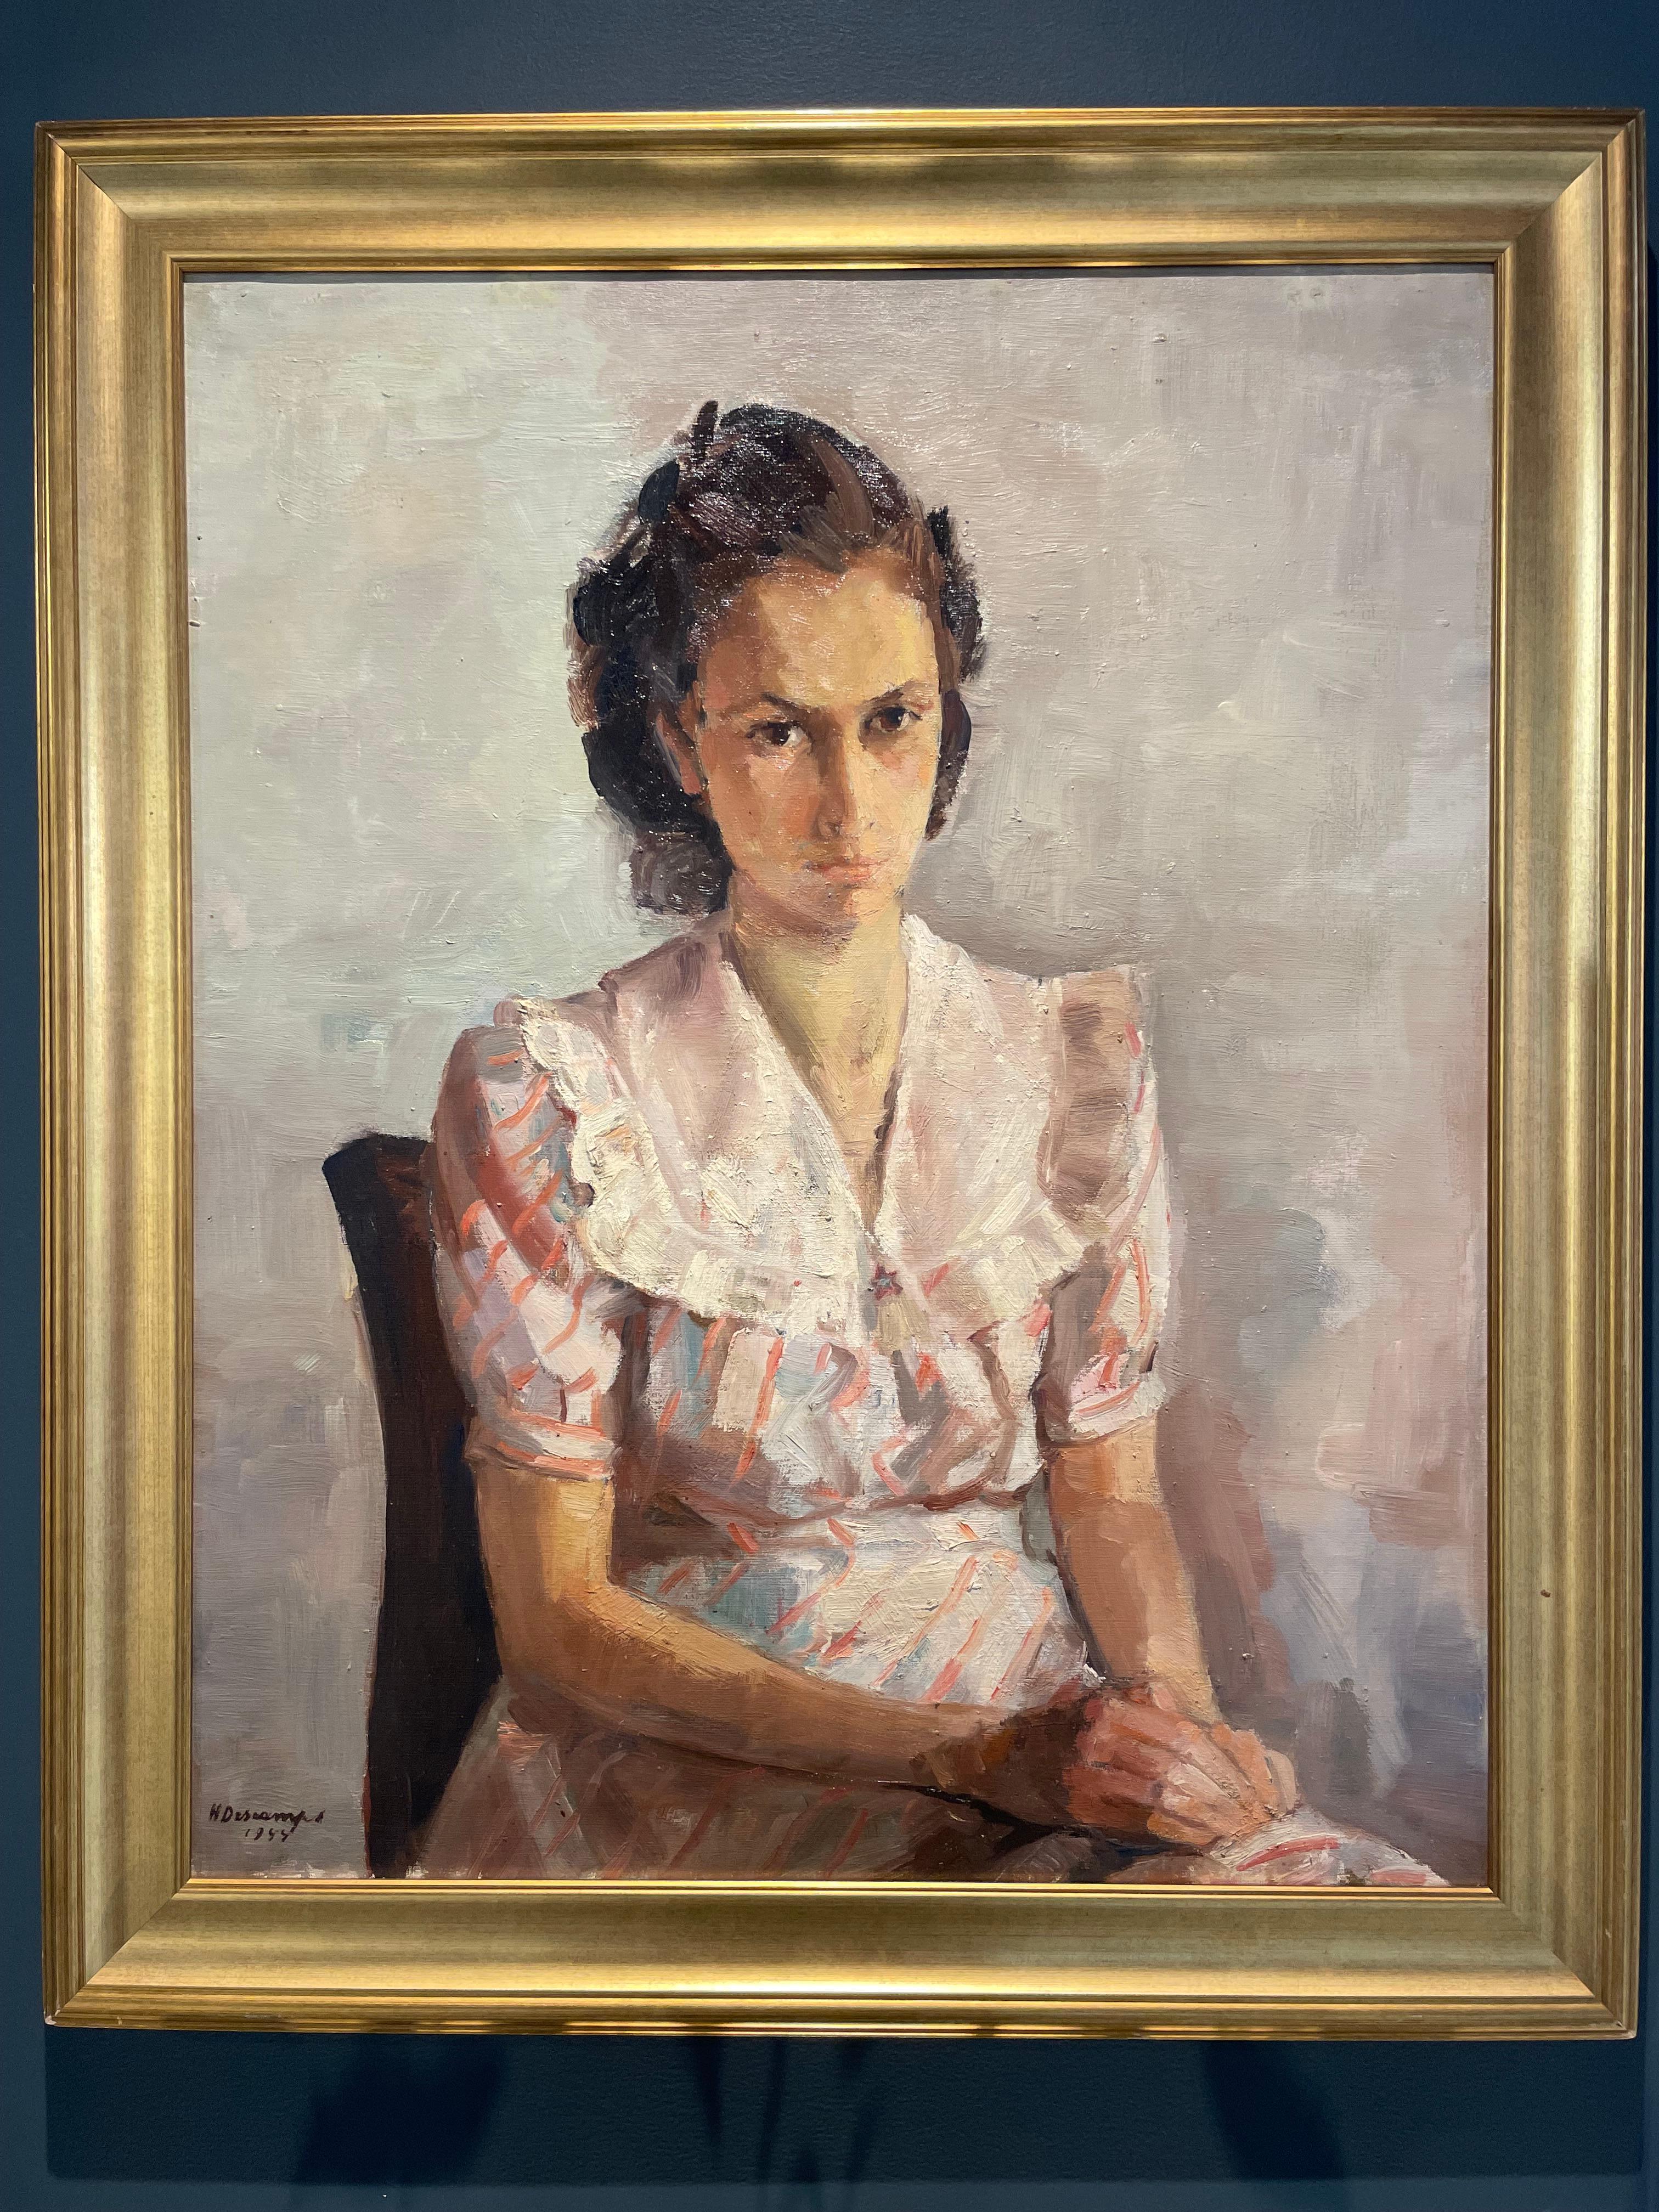 Portrait of the 20th century signed Henri Descamps (1898-1990) Young dark-haired girl seated wearing a white dress with shades of pink and blue with red stripes, hands crossed, and an intense and persistent gaze.